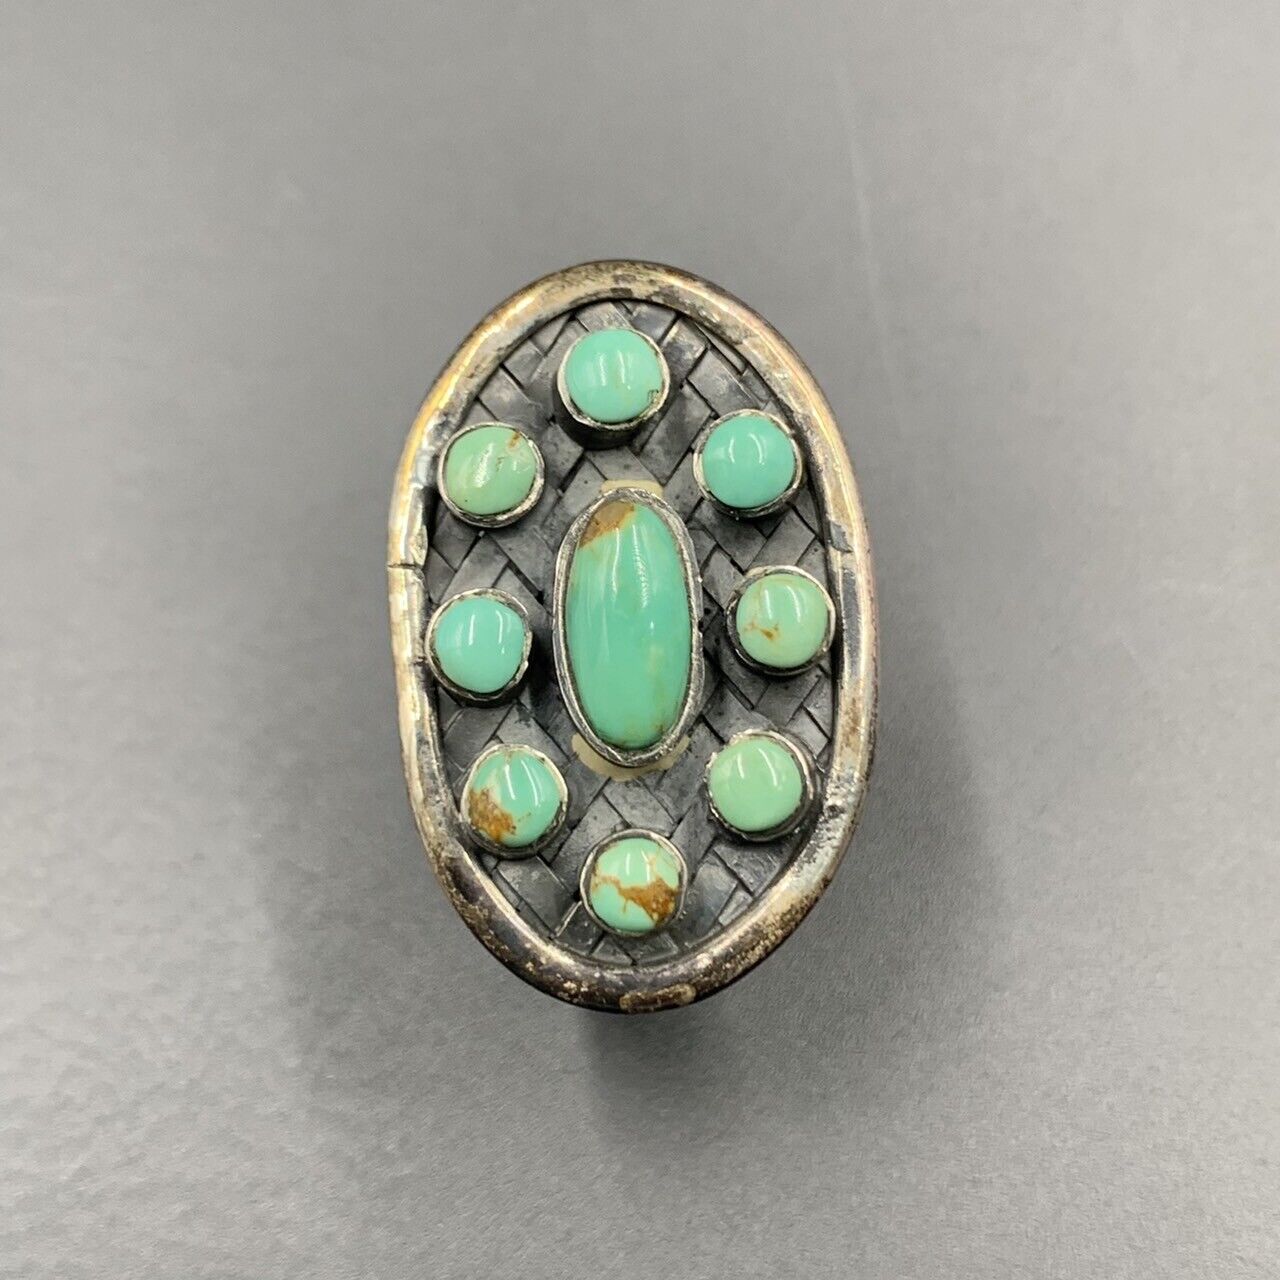 Handmade Natural Thai Made Turquoise With Silver Ring, Native American Inspired Ring. - Image 3 of 5